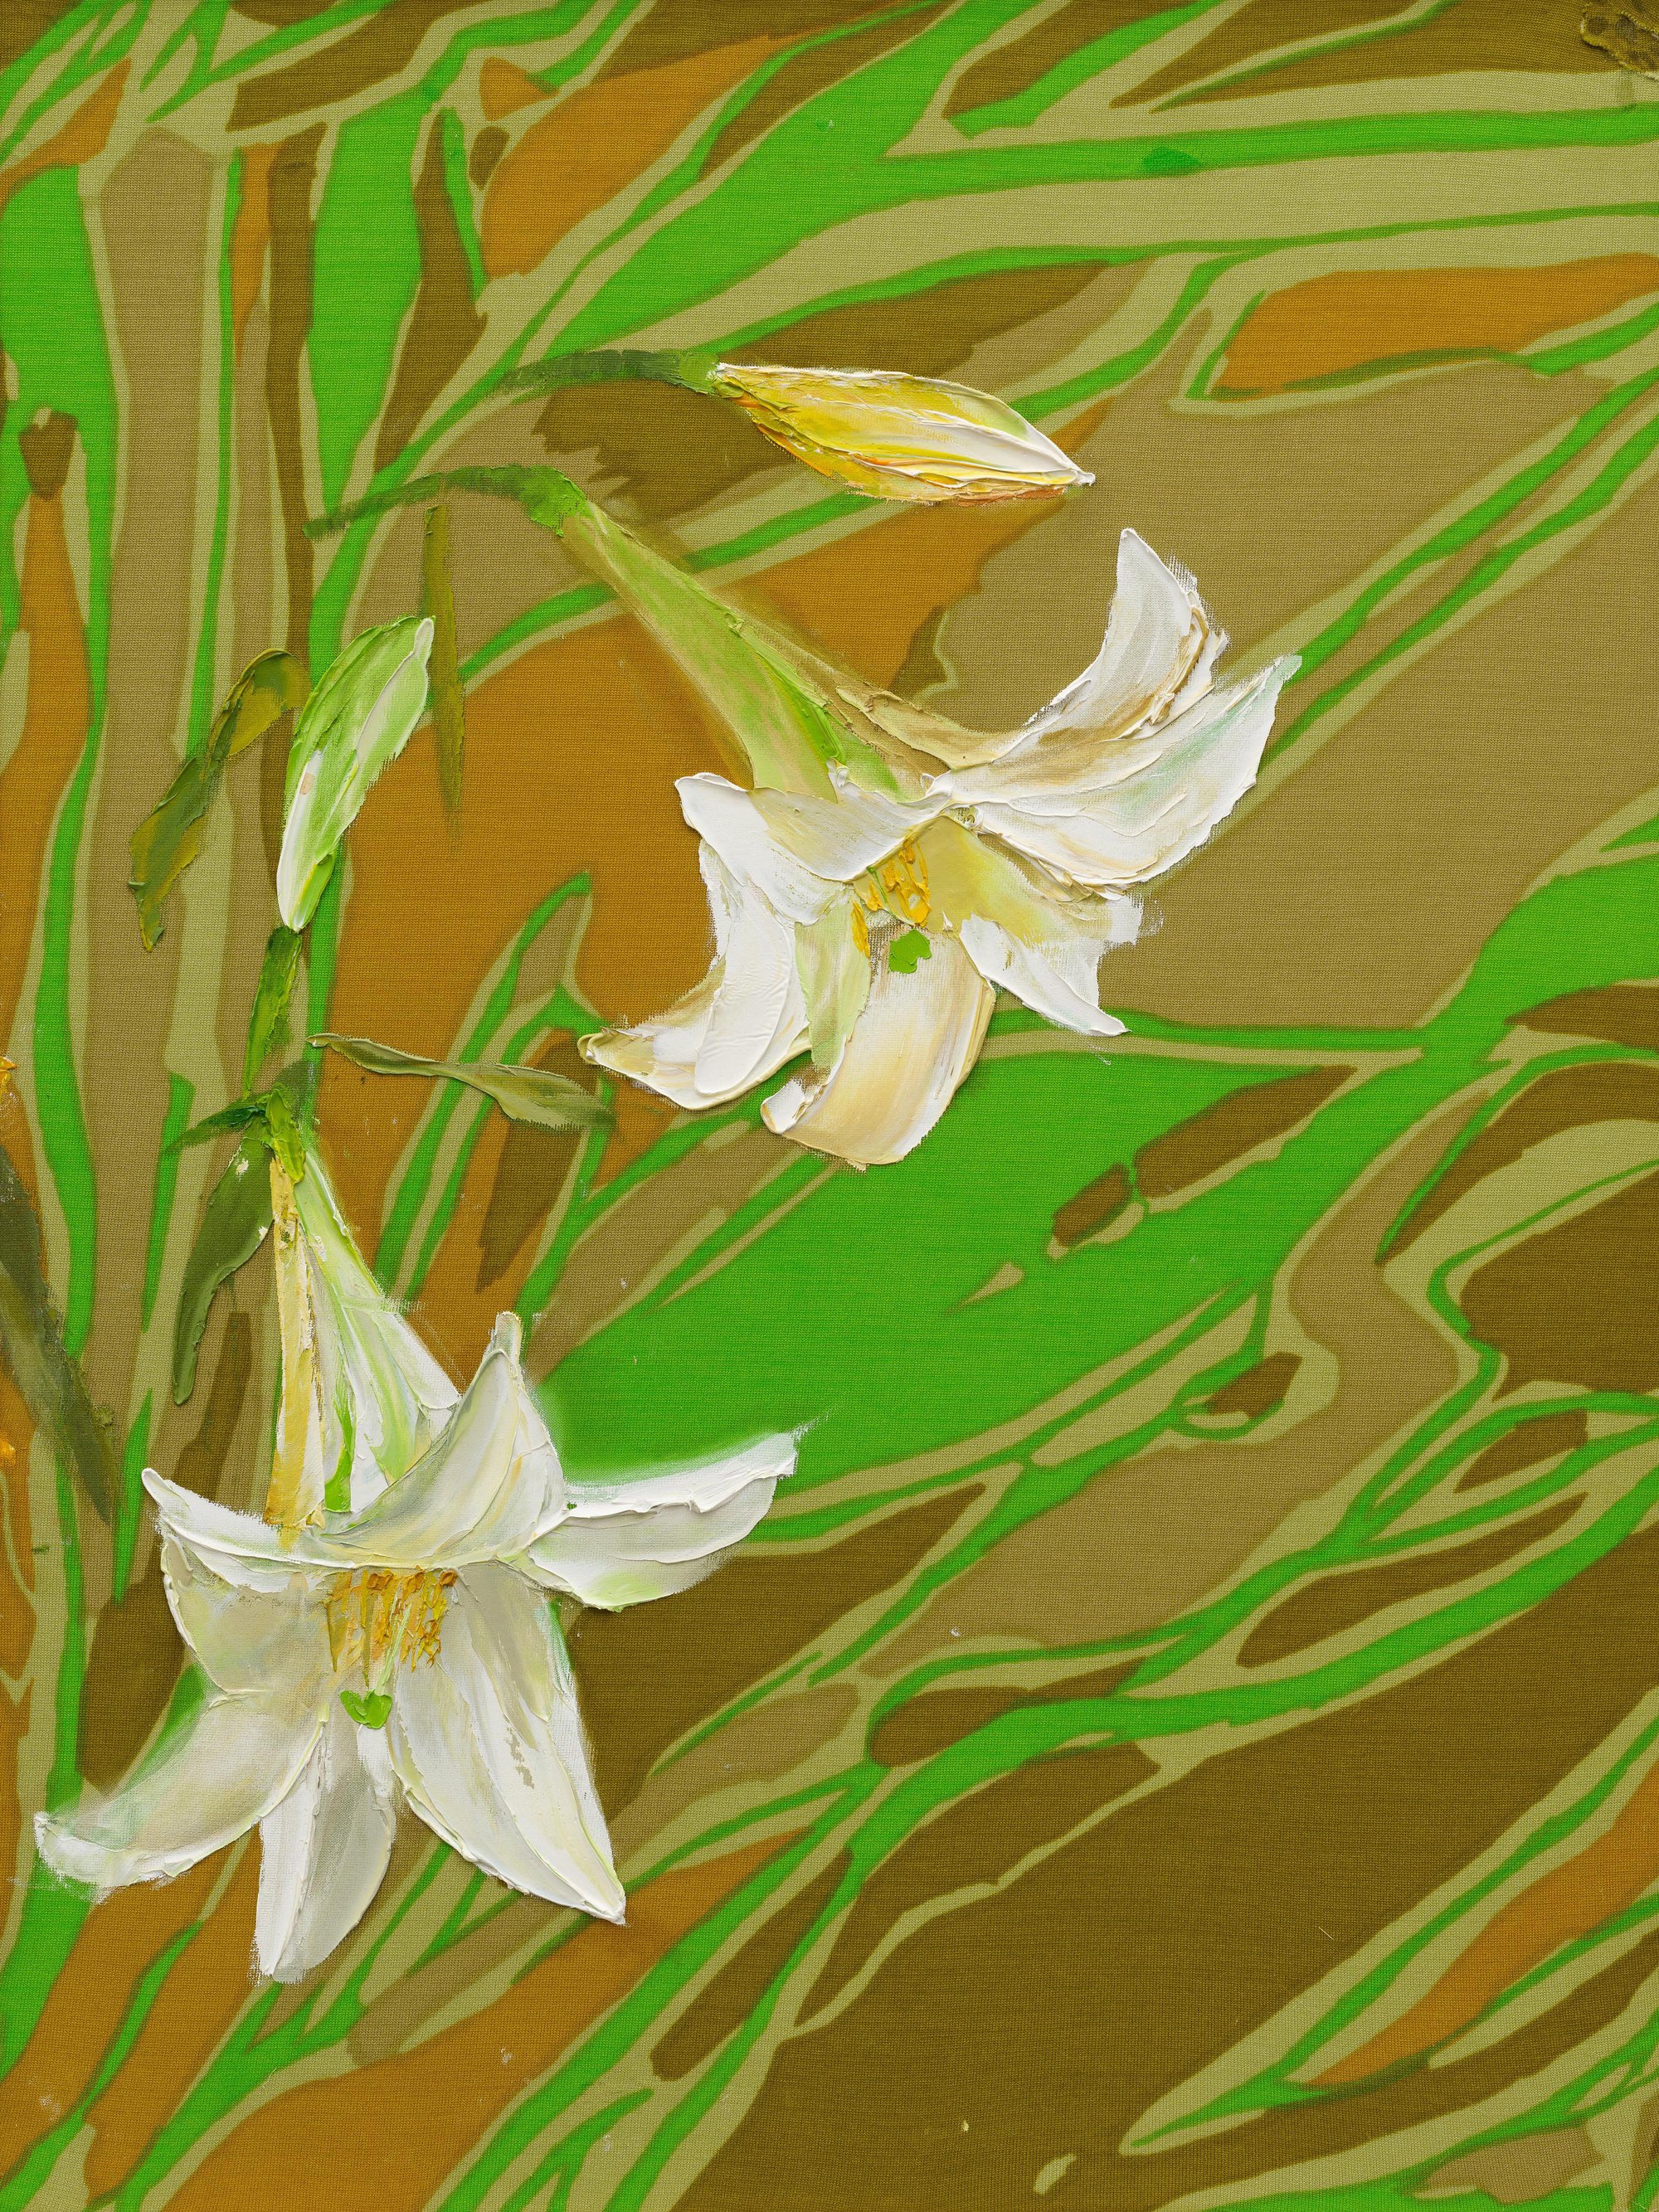 Bernat Klein, Two lillies, oil on screen printed knitted jersey polyester (Diolen), 65 x 50 cm (25 5/8 x 19 3/4 in), 1998